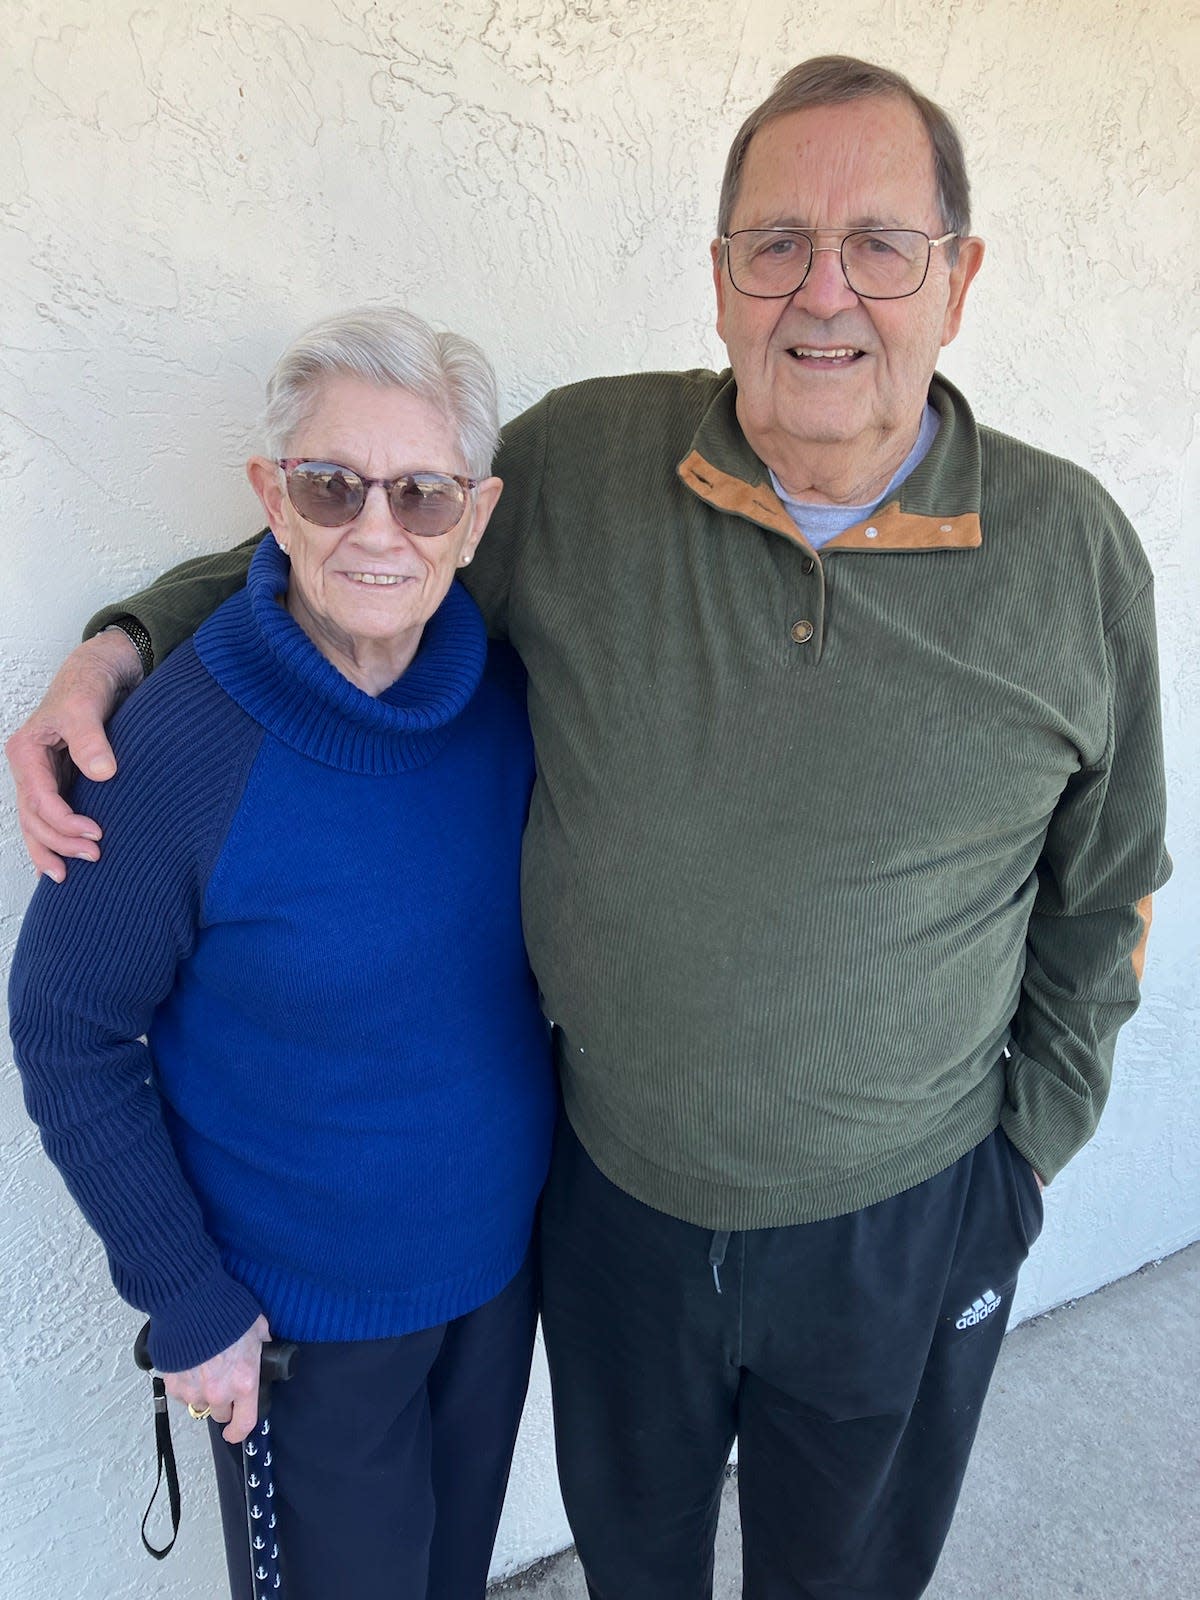 After several career moves that took them around the country, Peggy and Ron Chatfield decided to retire in Ohio to be closer to family and chose Bucyrus because of its small-town feel and affordable housing.